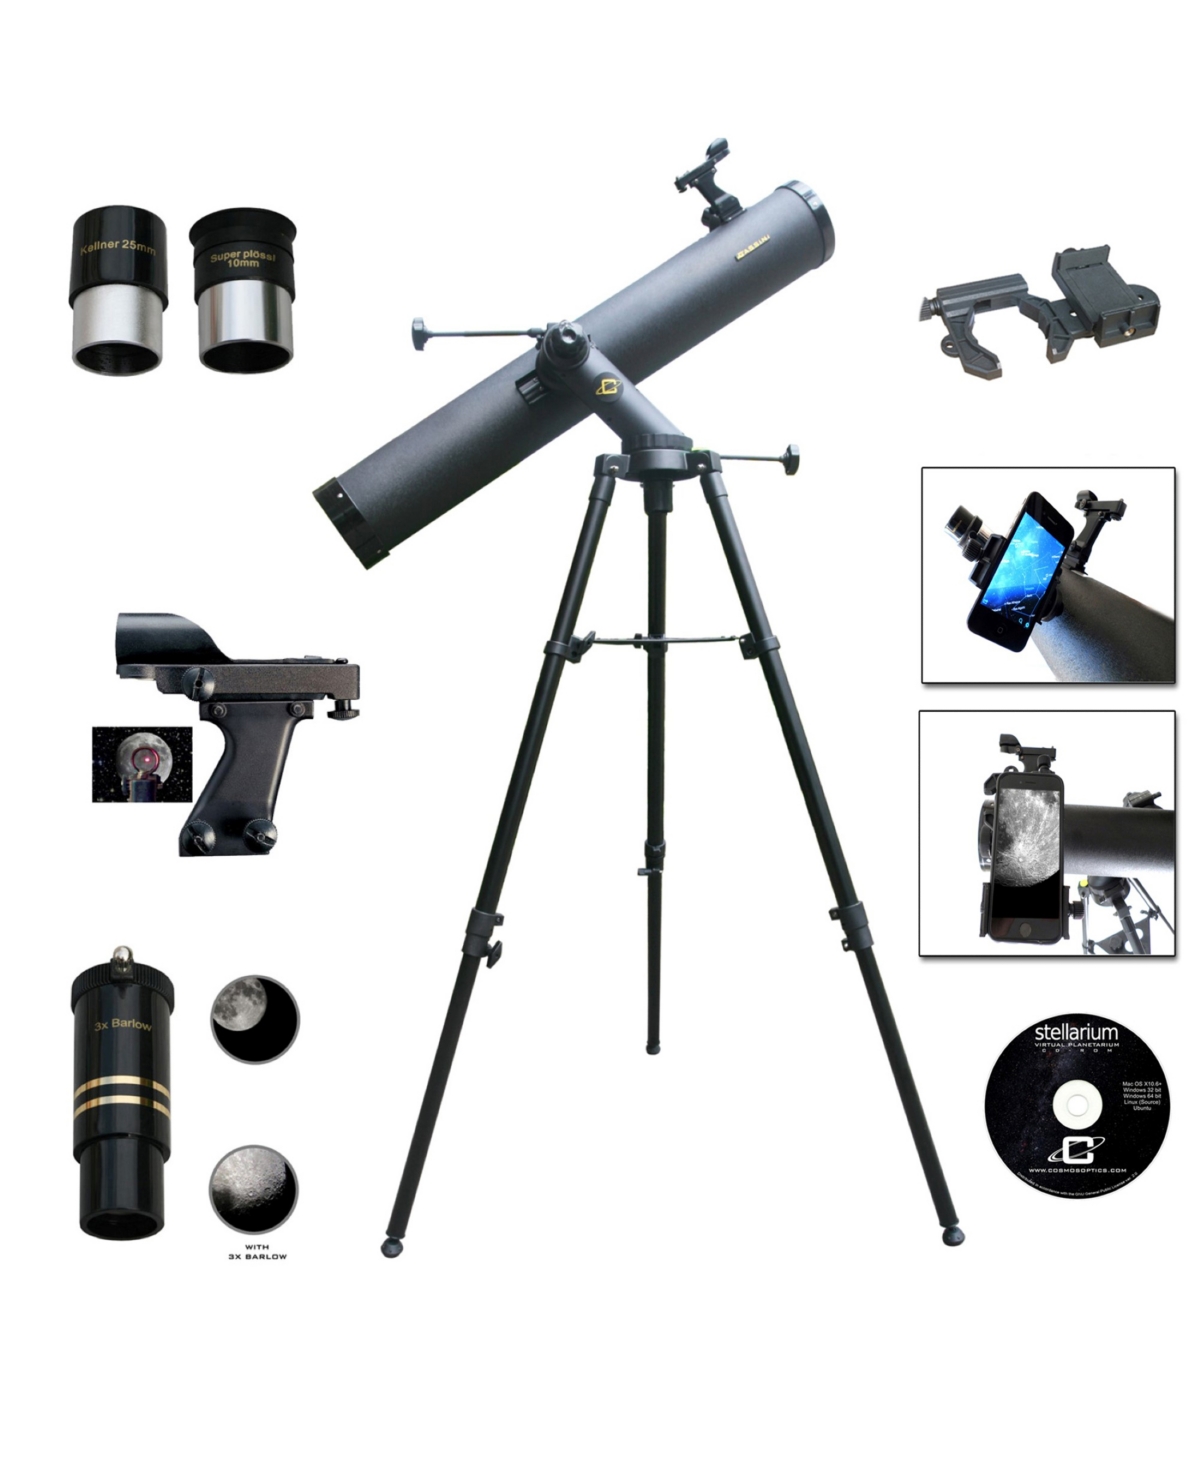 Cosmo Brands Cassini 1000 X 120mm Astronomical Tracker Mount Telescope And Smartphone Adapter In Charcoal